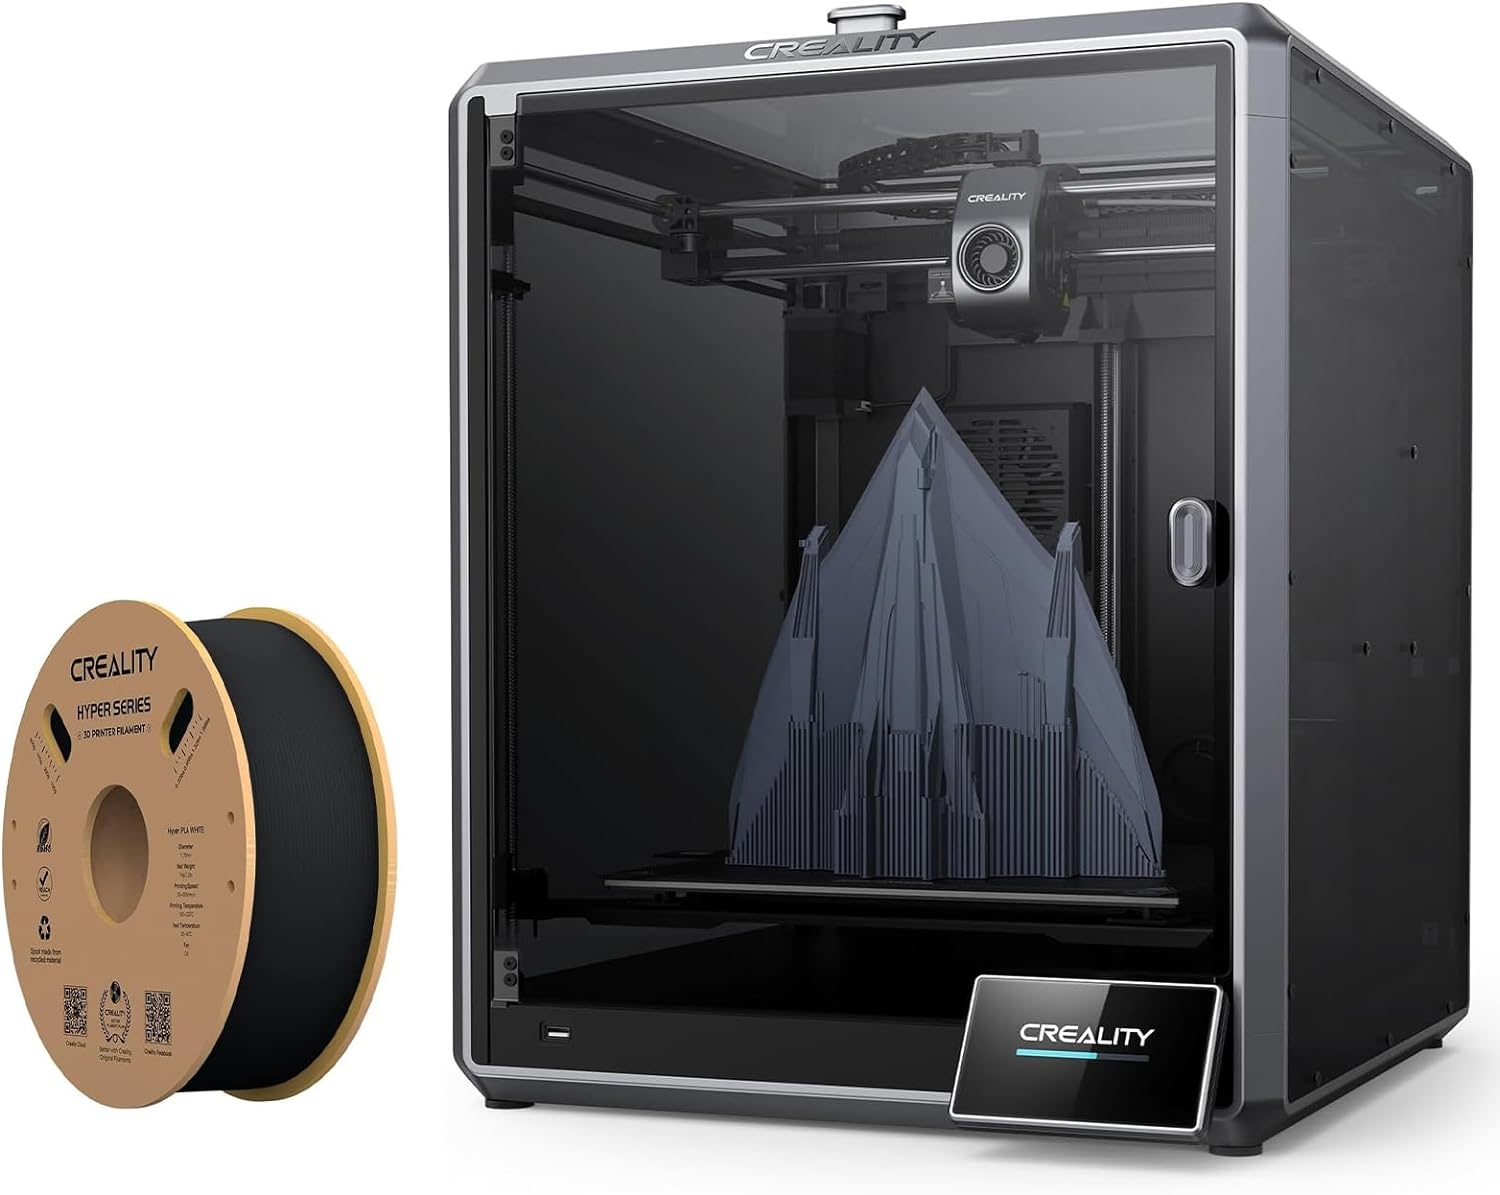 https://www.3dware.ma/wp-content/uploads/2023/09/Creality-K1-Max-3D-Printer-600mm_s-Max-Speed-3D-Printers-Bundle-with-Creality-High-Speed-PLA-Filament-Black-0.jpg